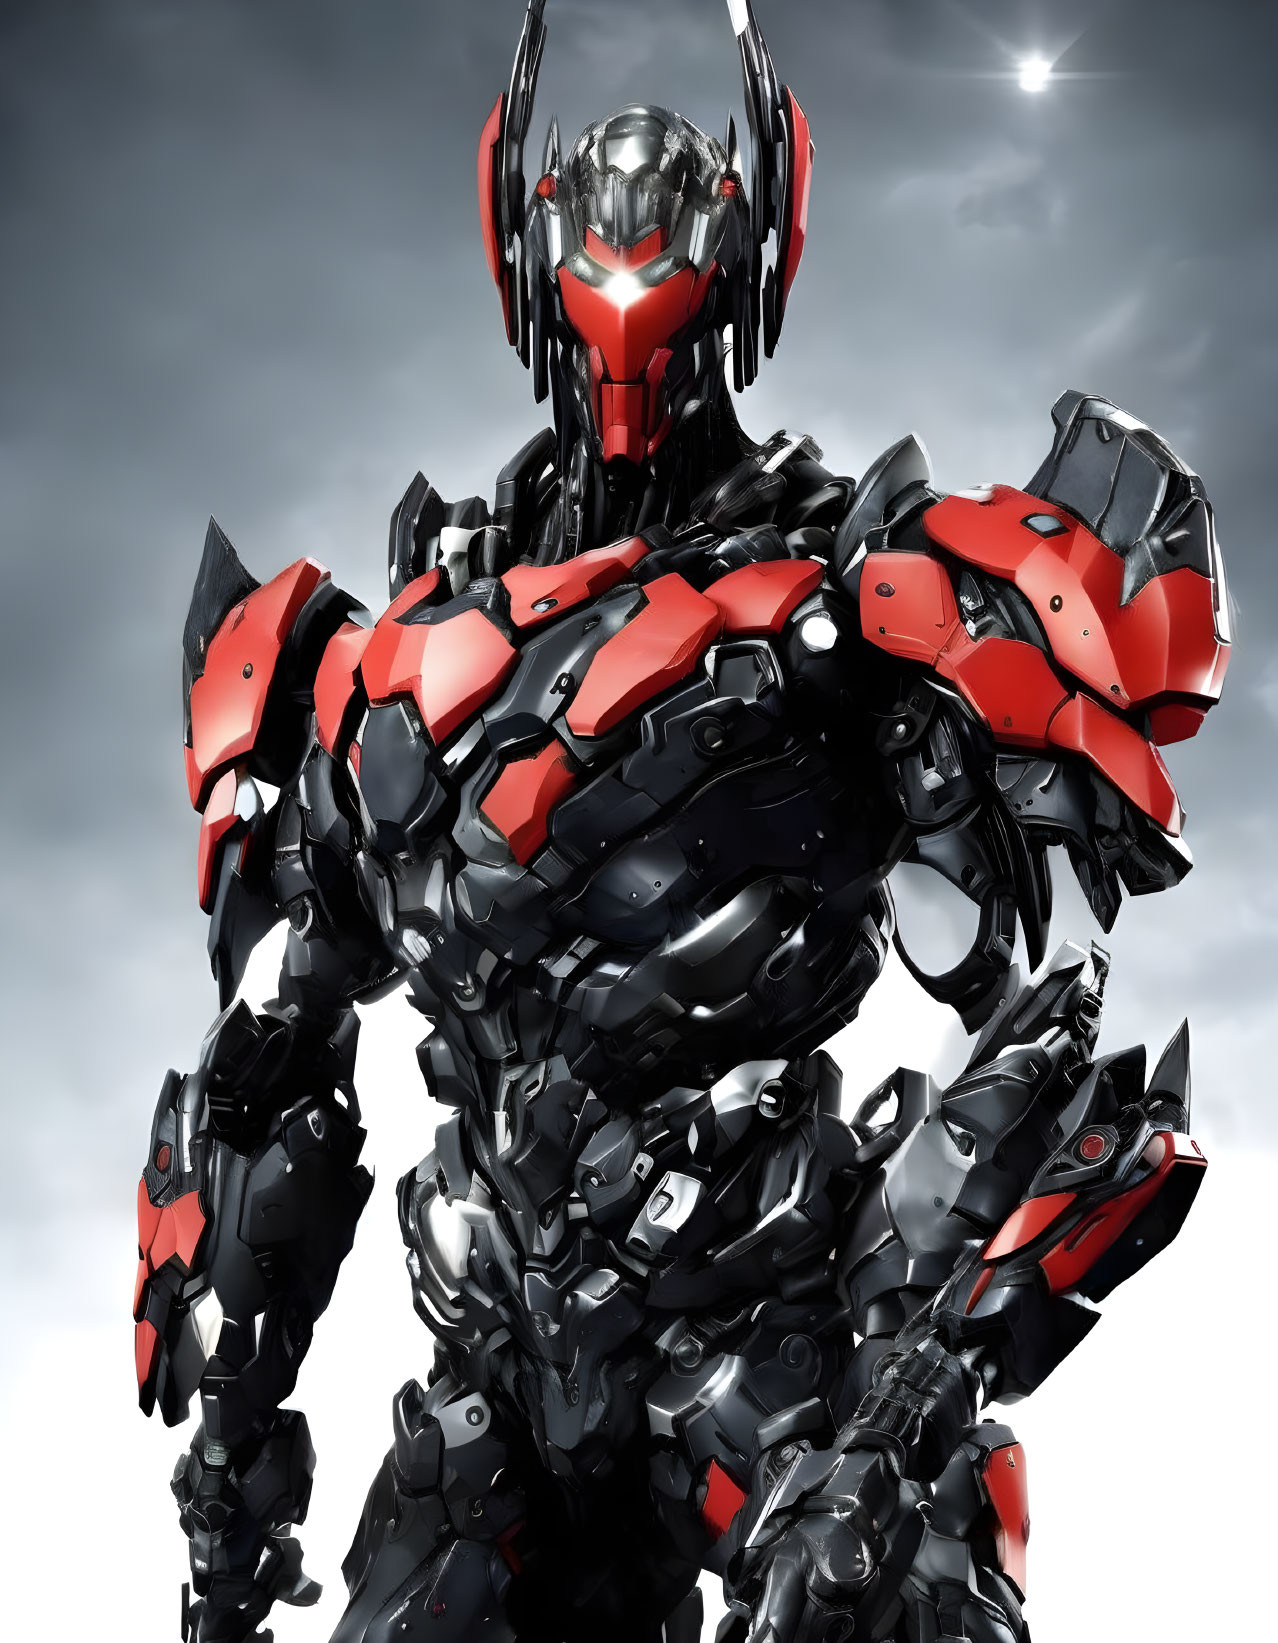 Futuristic red and black armored robot on cloudy sky backdrop